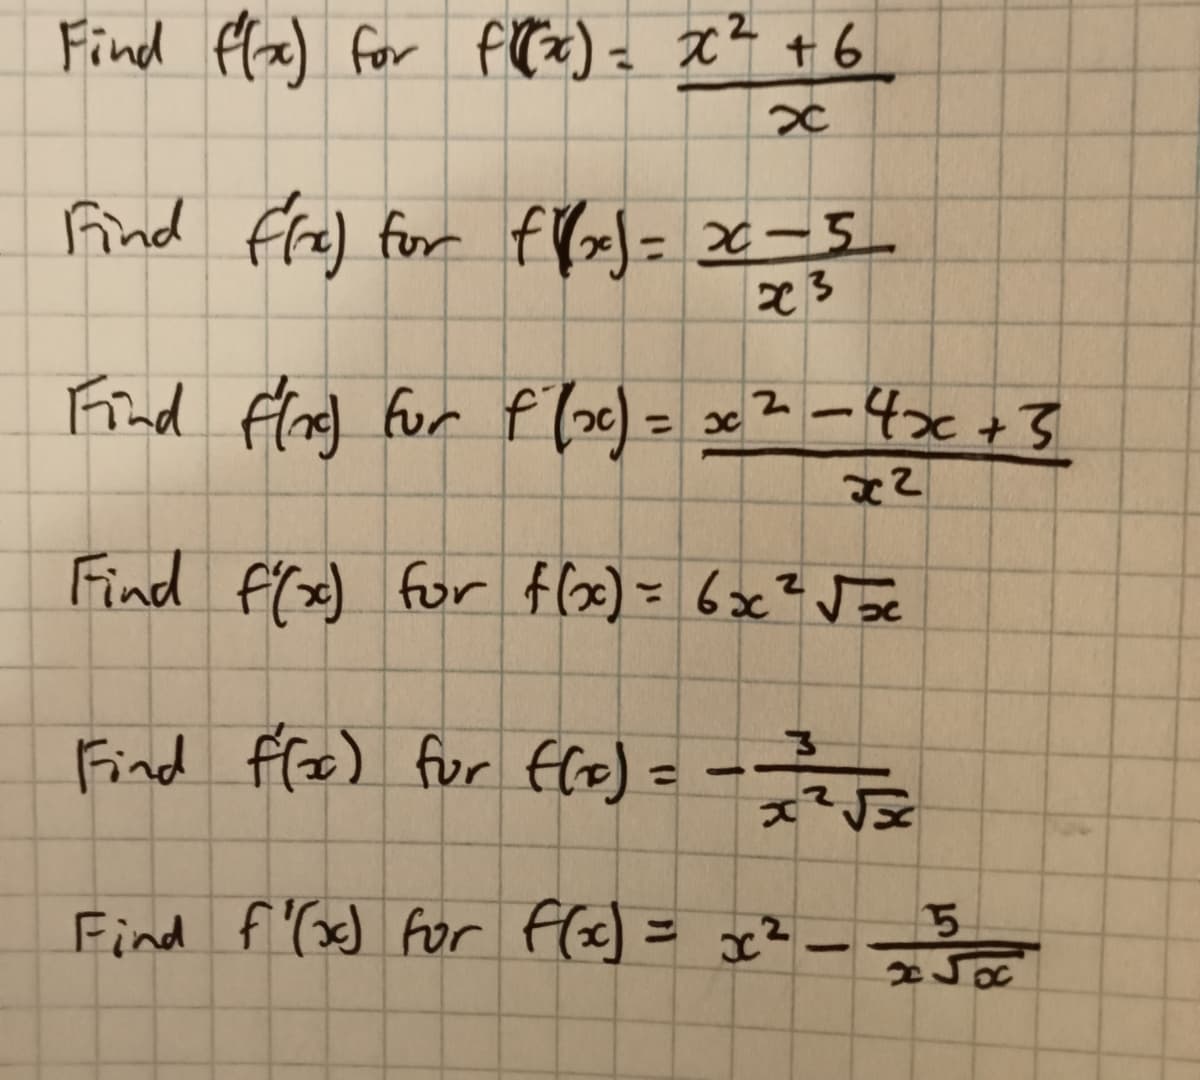 Find fla) for fTx) = x? +6
find fre) for fY»)= x-5_
23
Frnd flad for f (oc) = x2-4x+3
Find f(x) for flax) = 6x? Joc
%3D
Find fle) fur flo) =-
-e
%3D
Find f'(x) for fle) = c?--
